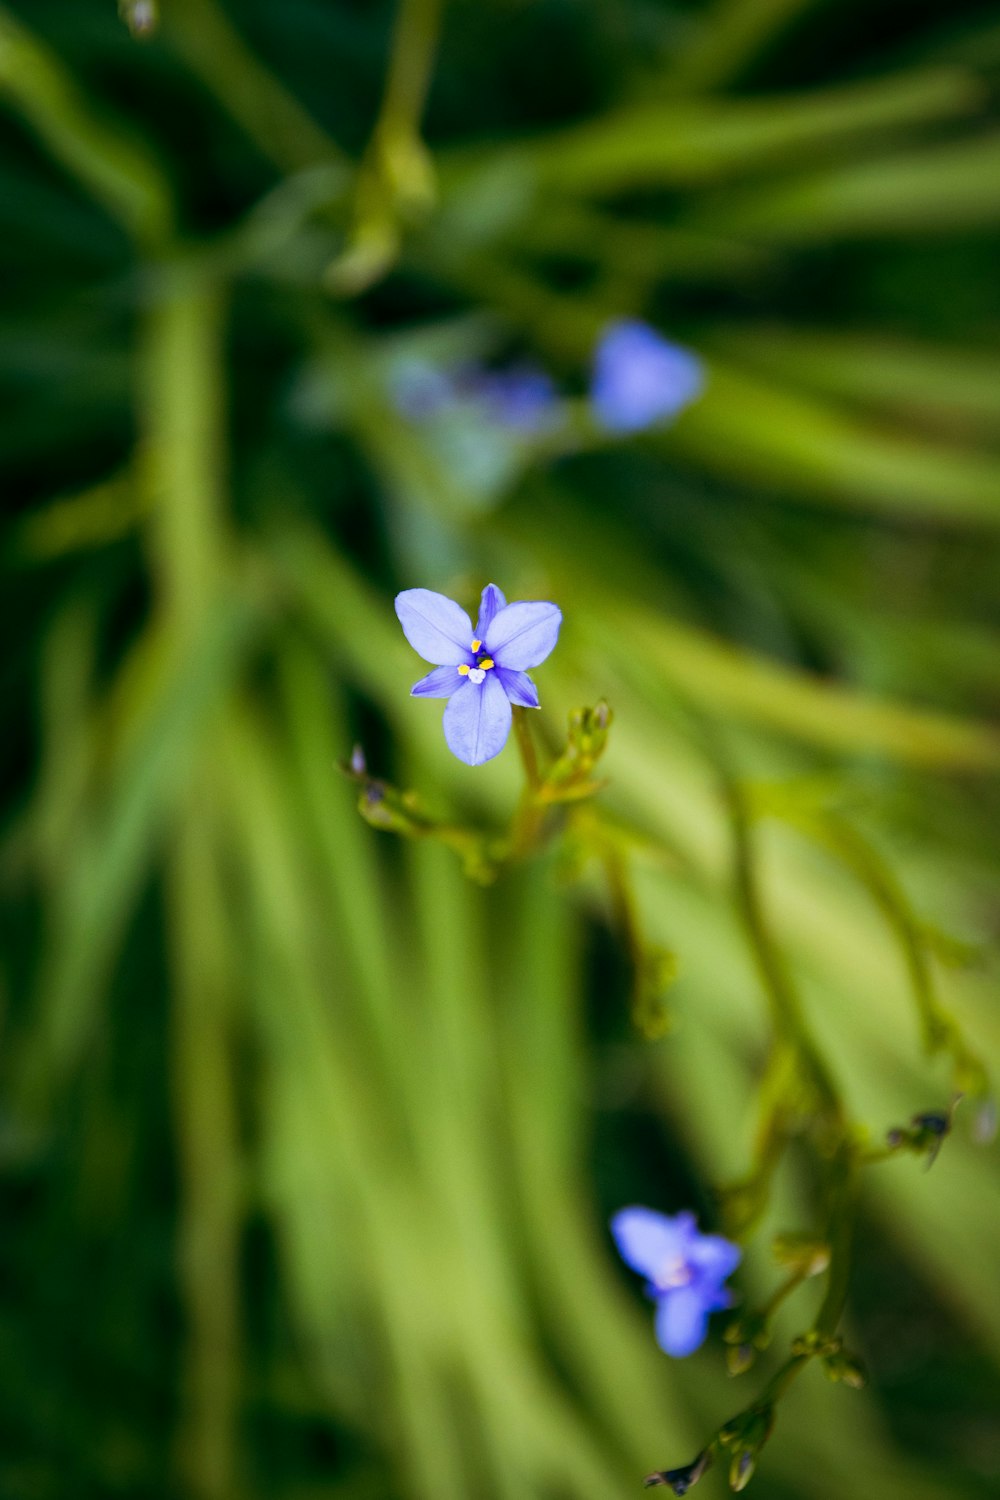 a close up of a blue flower on a plant